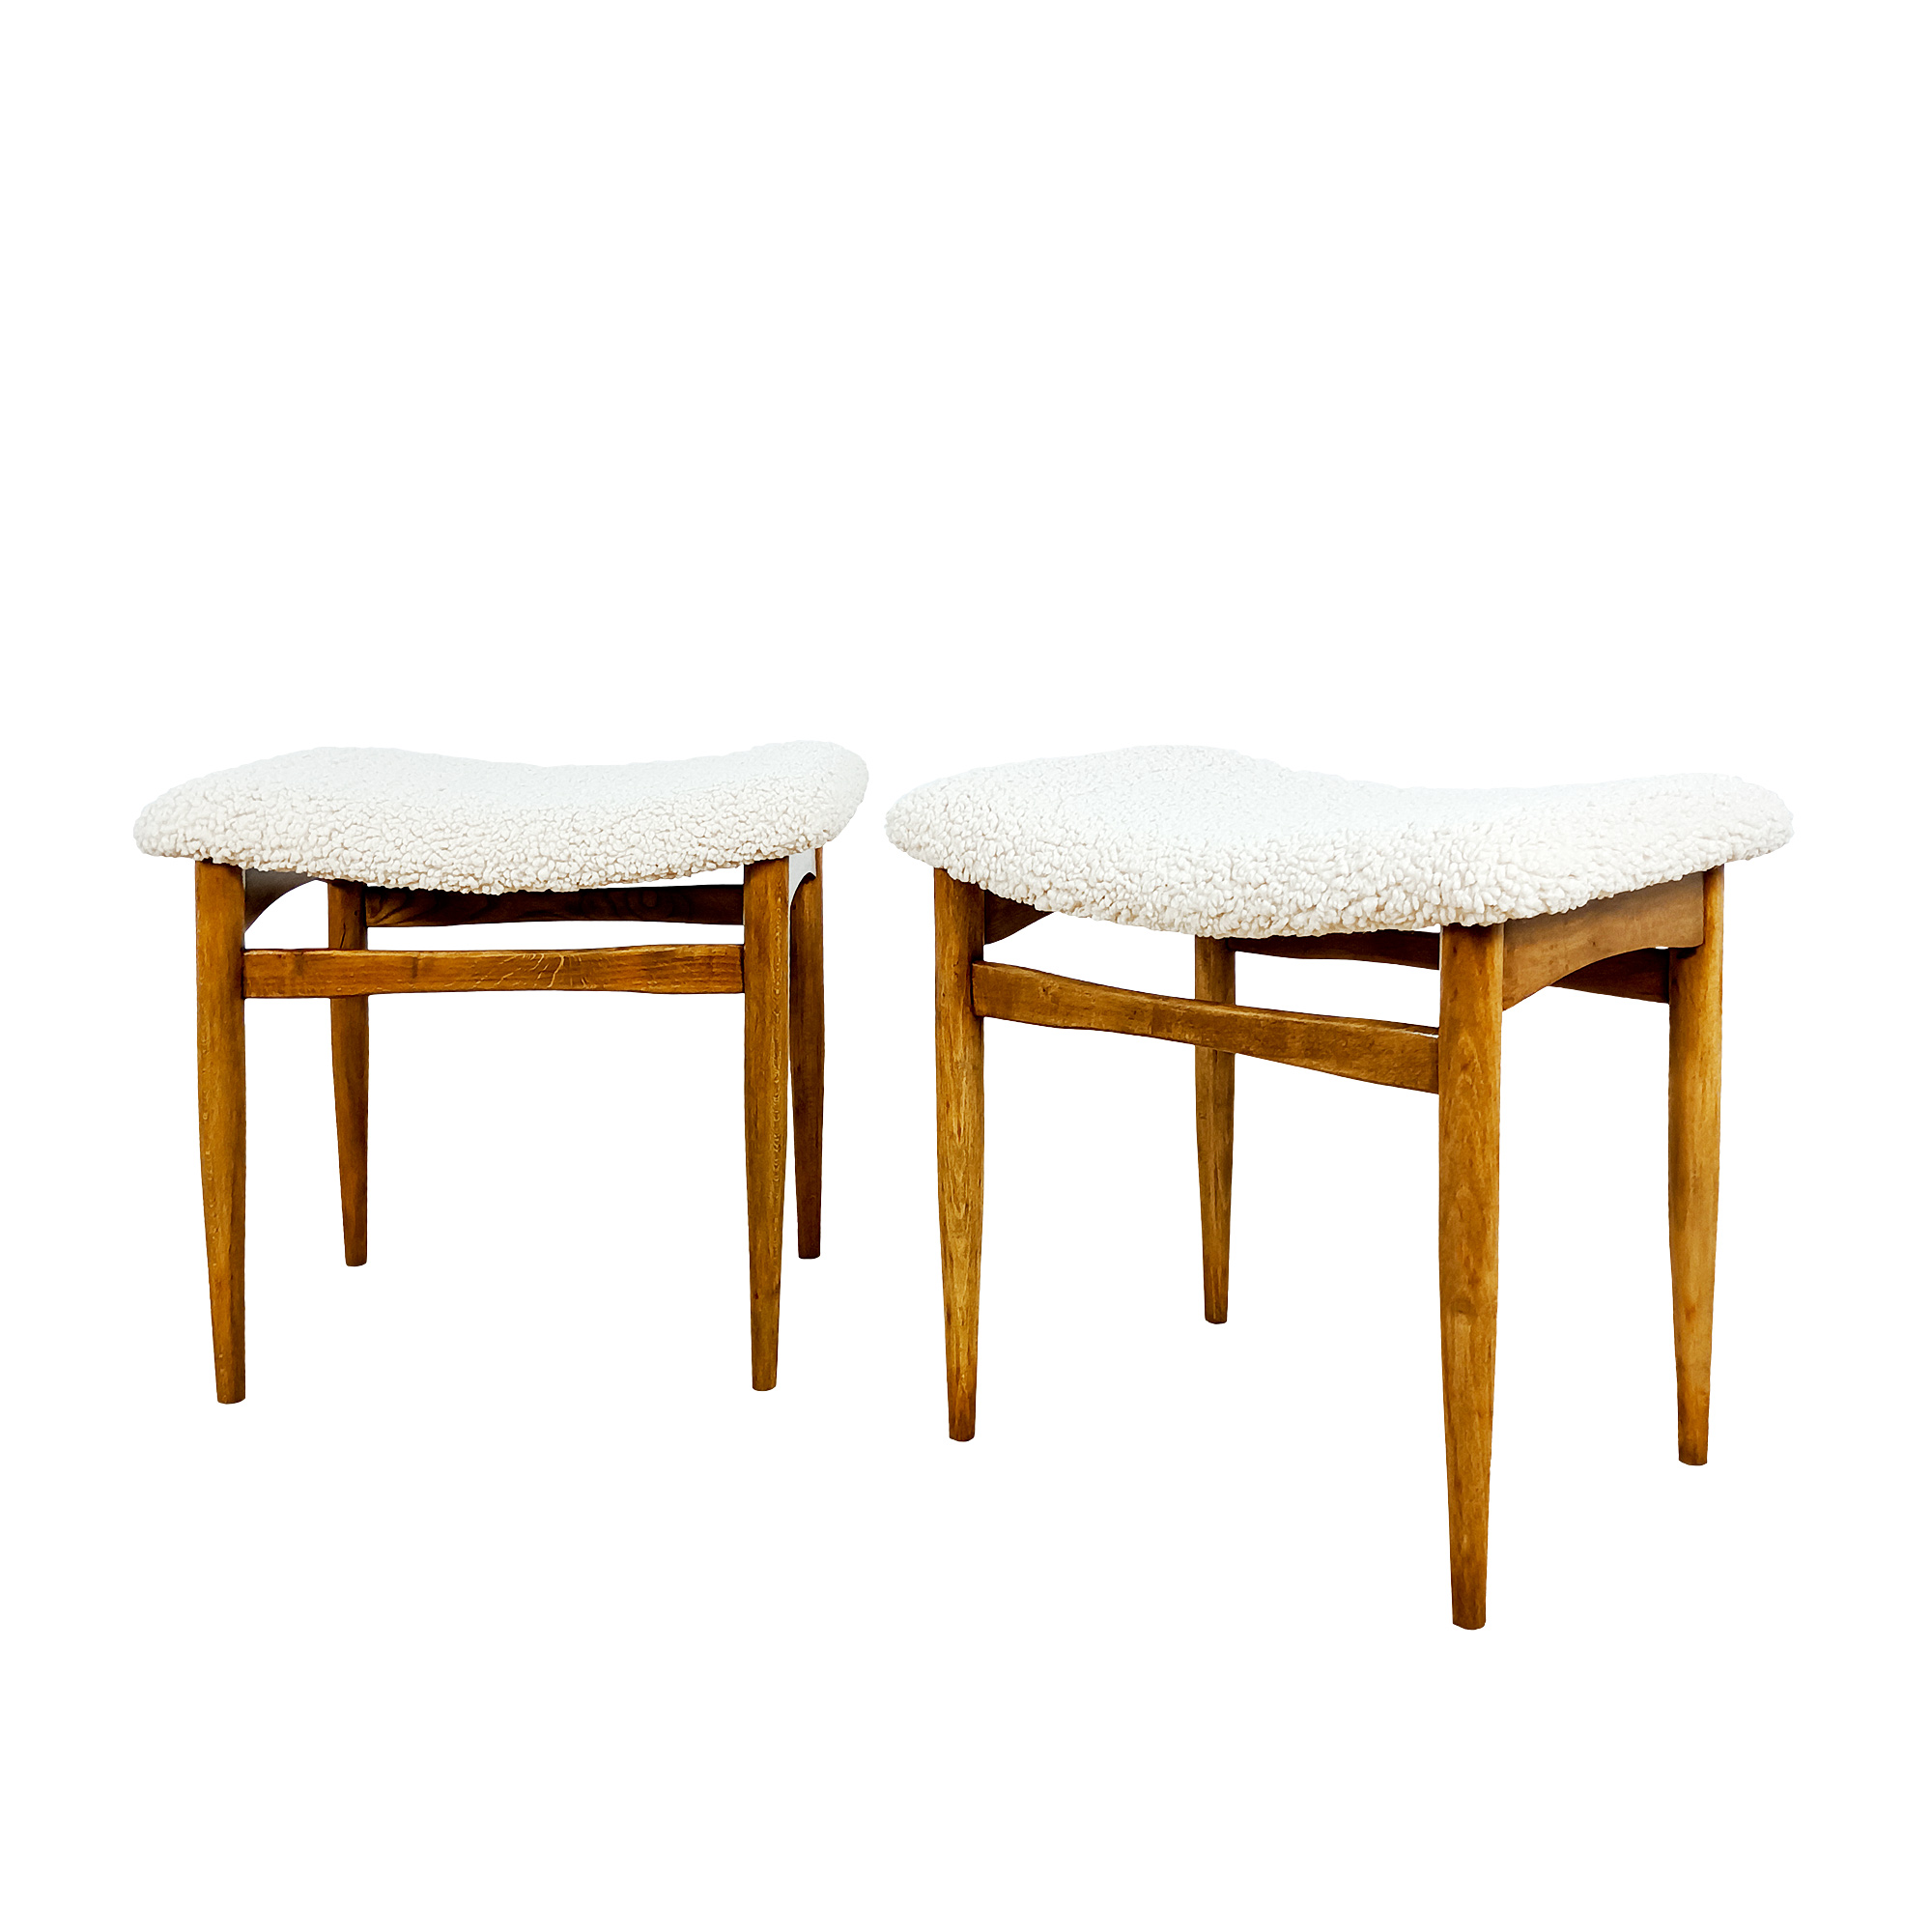 Pair of small benches – Spain 1960